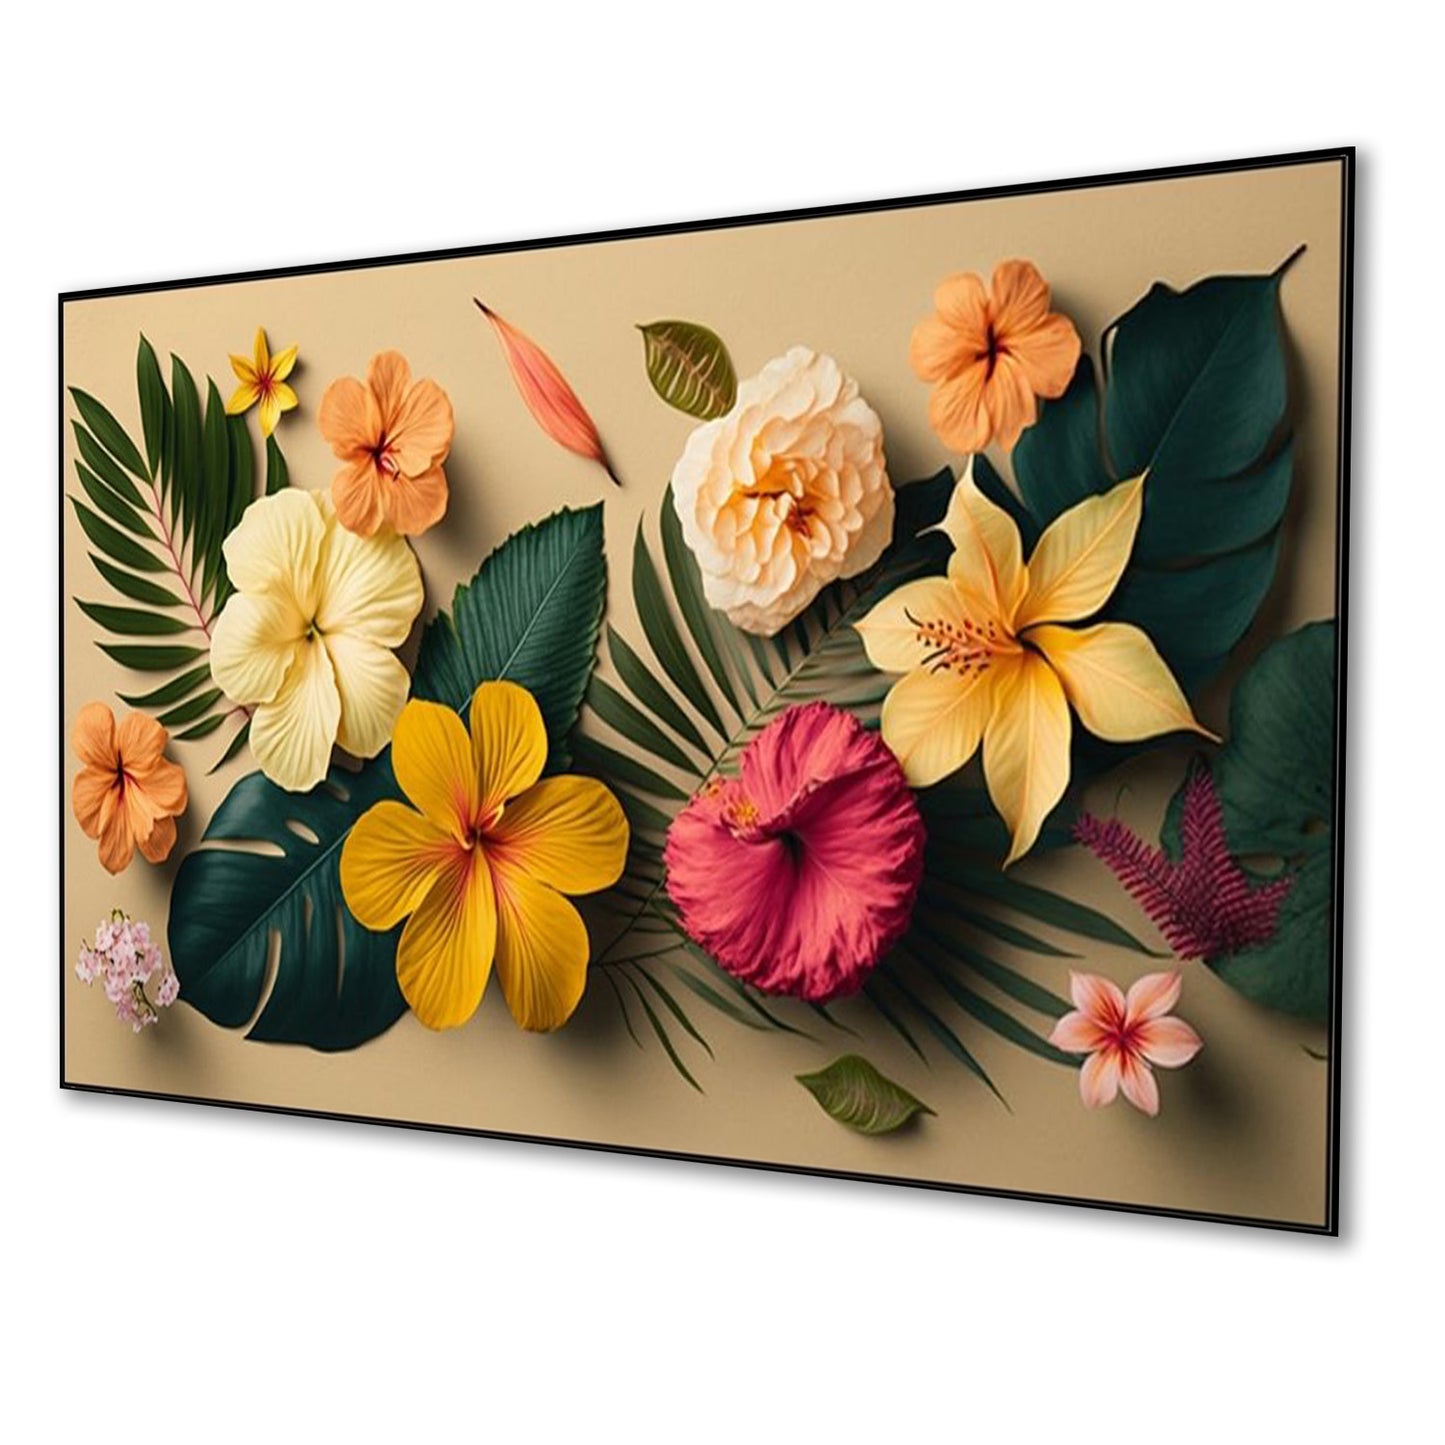 Tranquil Tropical Flowers on Beige Wall Painting